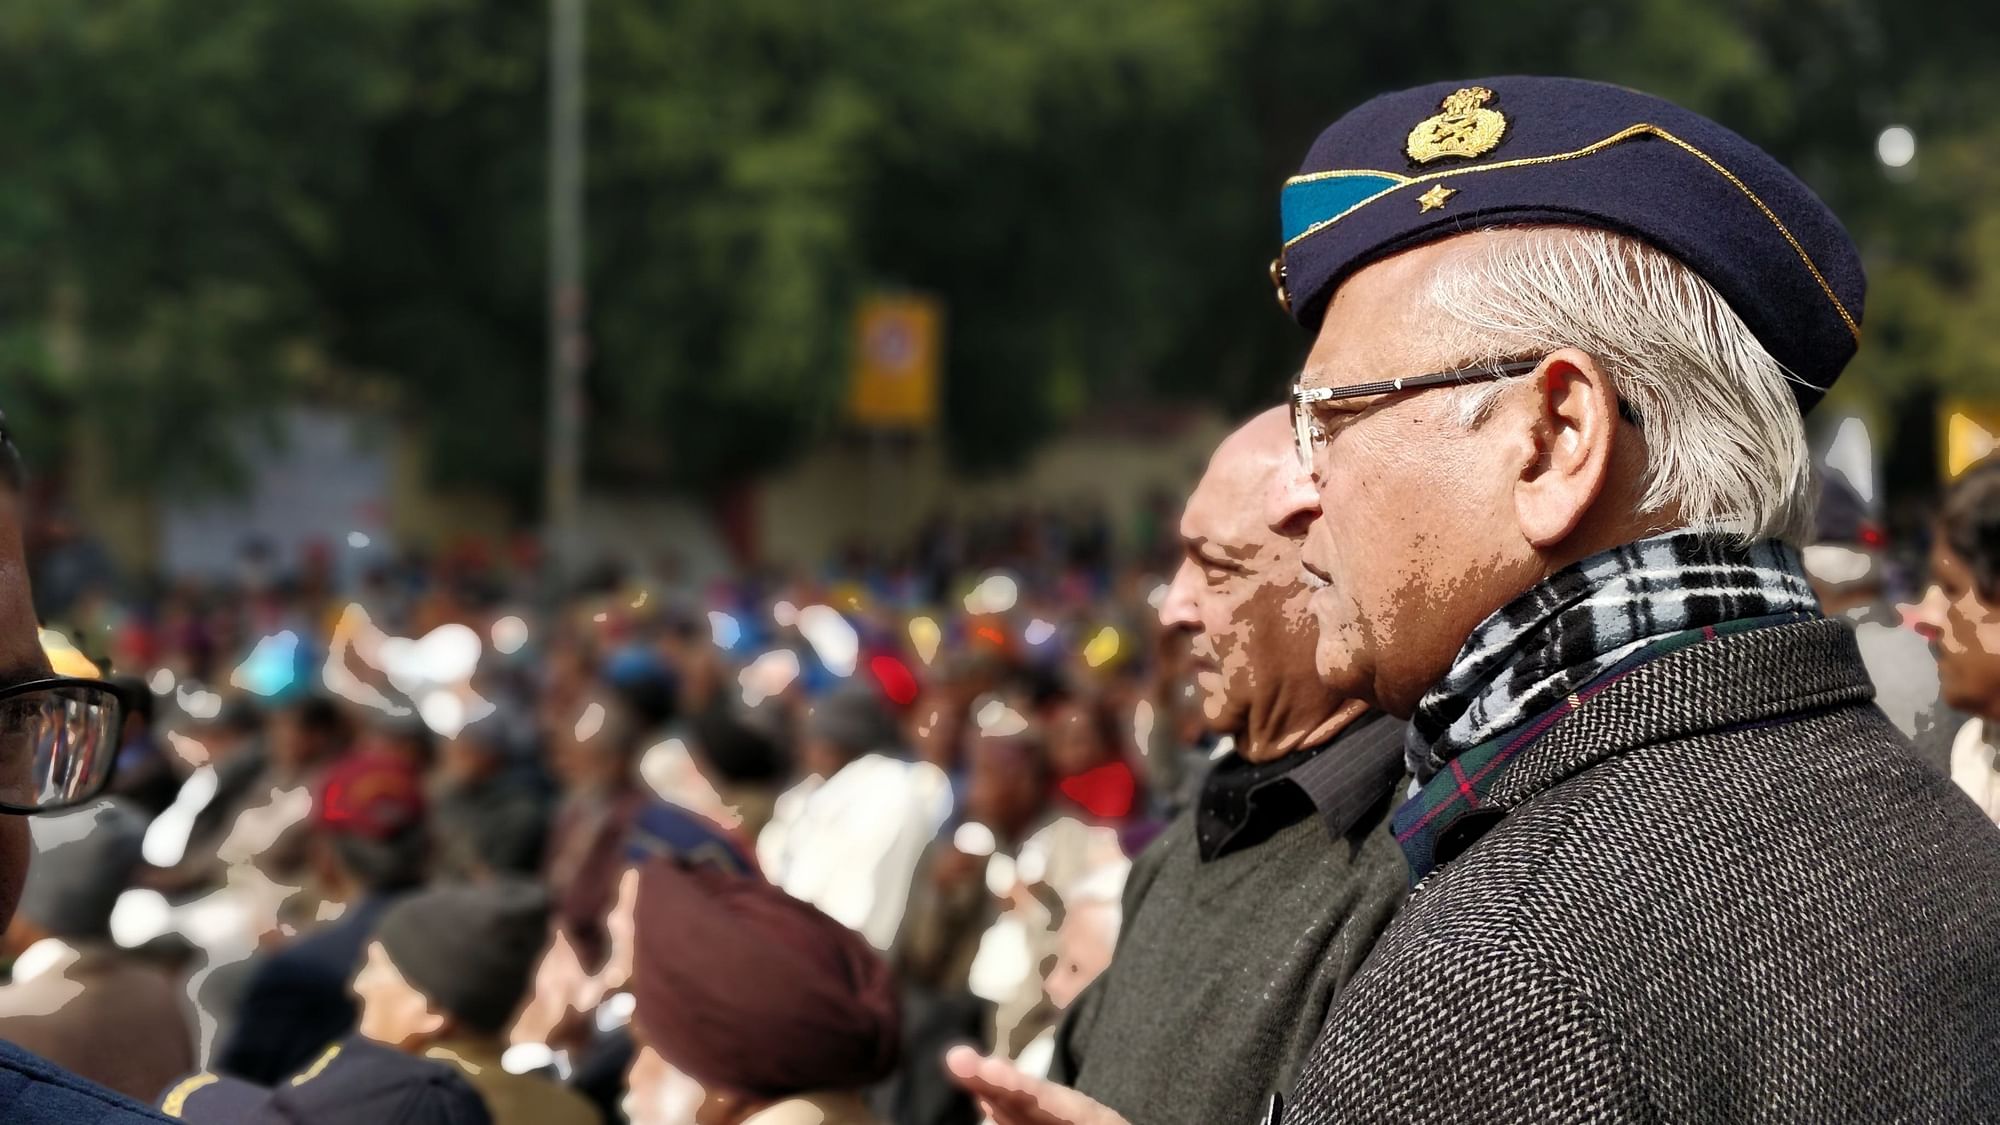 A nine-day joint agitation is being led by the Indian Ex-servicemen Movement alongside farmers’ and youth organisations at Delhi’s Jantar Mantar.